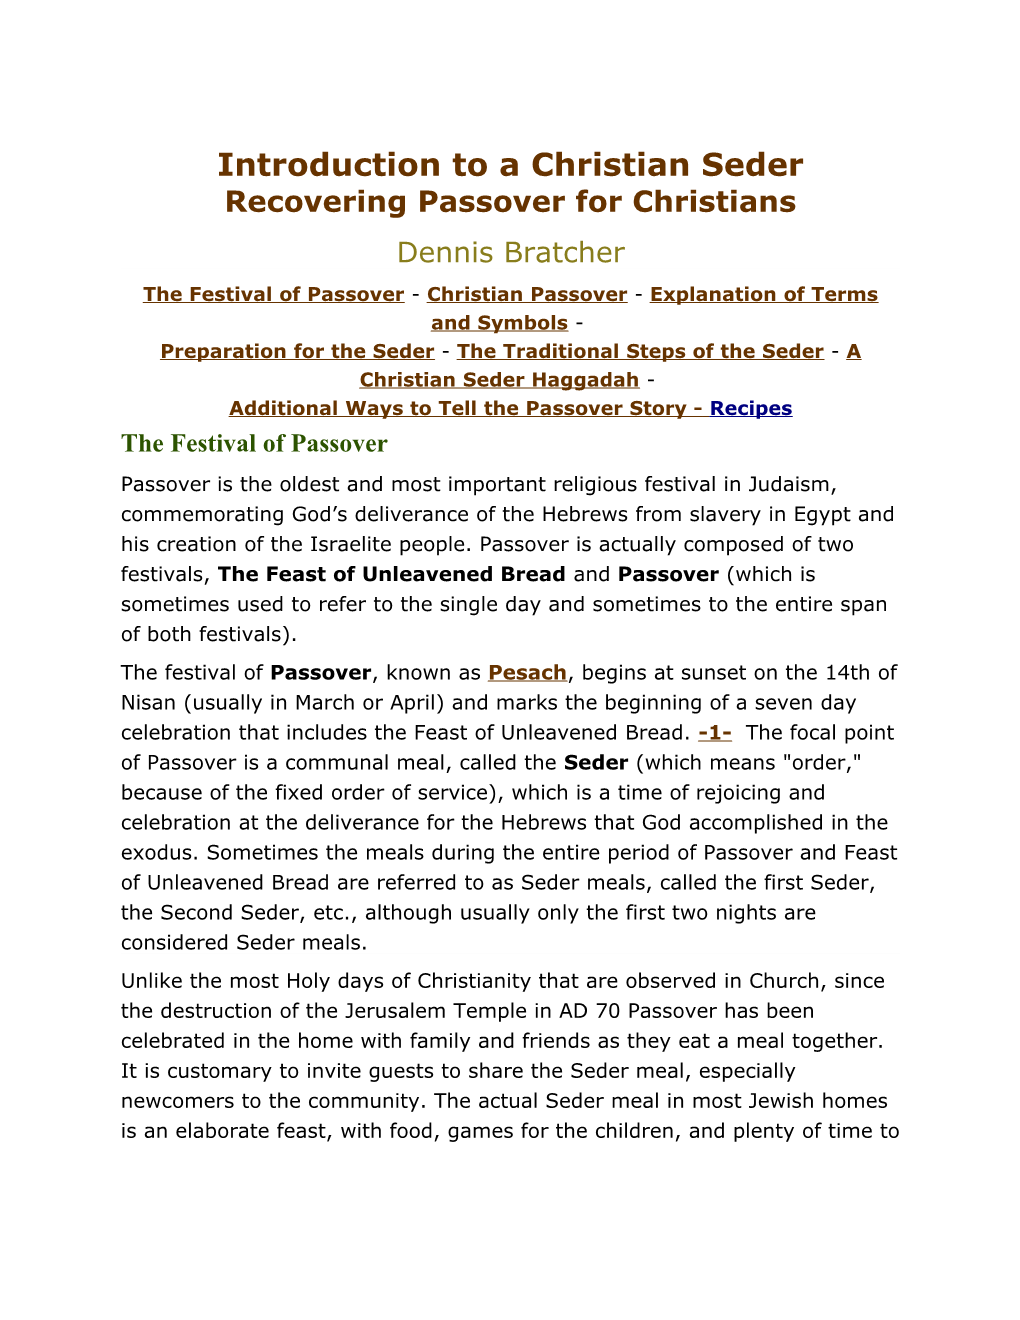 Introduction to a Christian Seder Recovering Passover for Christians